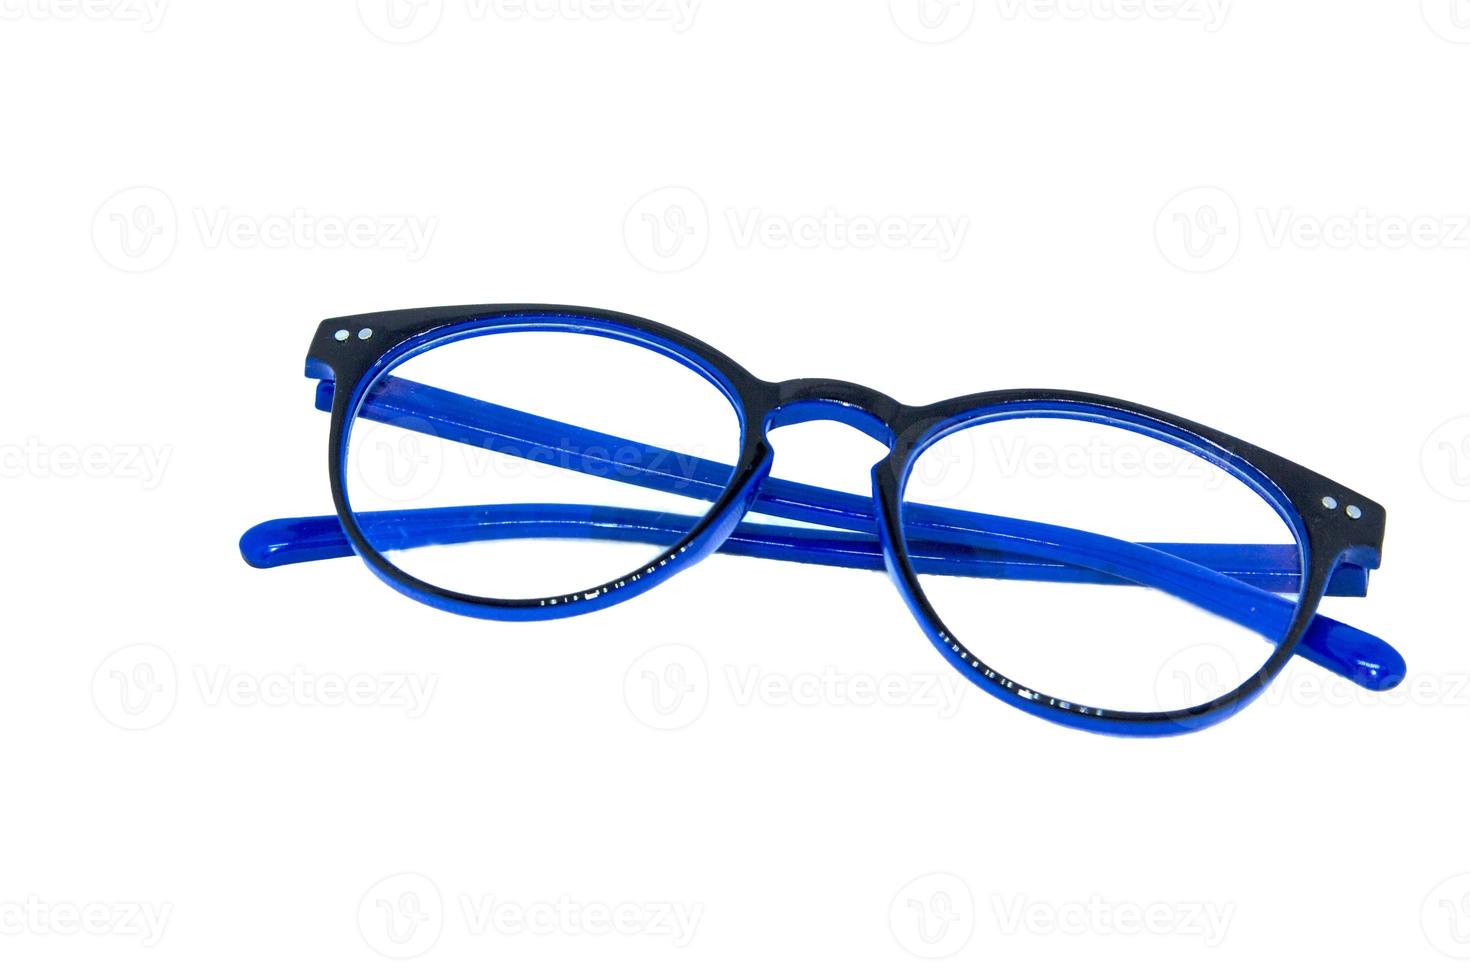 Presbyopia glasses are glasses for aging, suitable for reading, watching the phone on a white background taken with flash and LED lights, making my home studio shots clear and crisp. photo